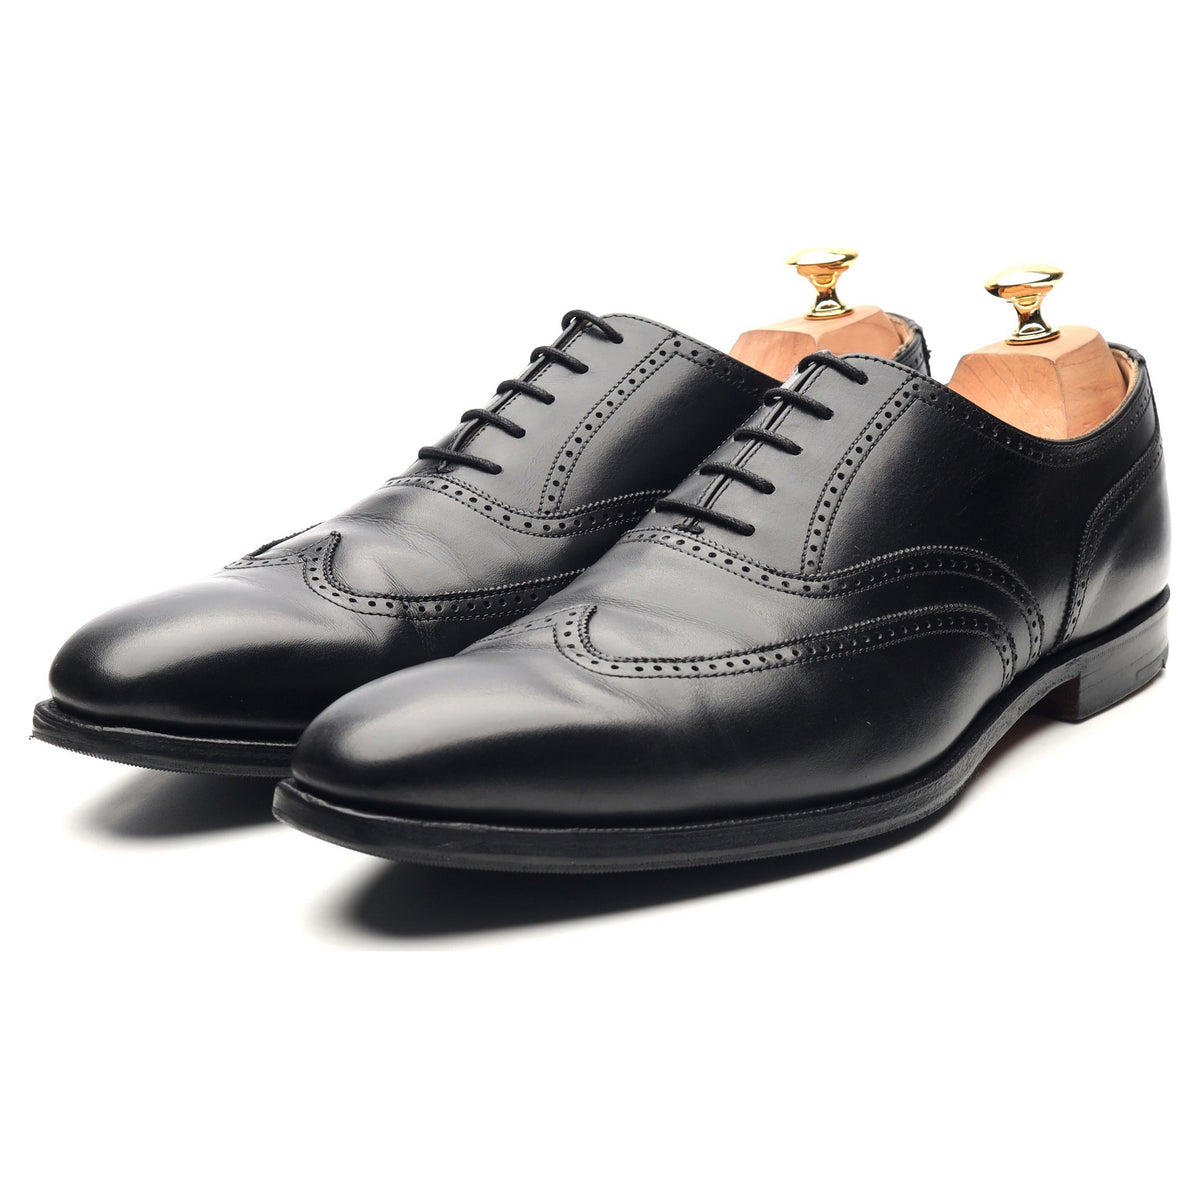 Drummond' Black Calf Oxford Brogues UK 10 E - Abbot's Shoes